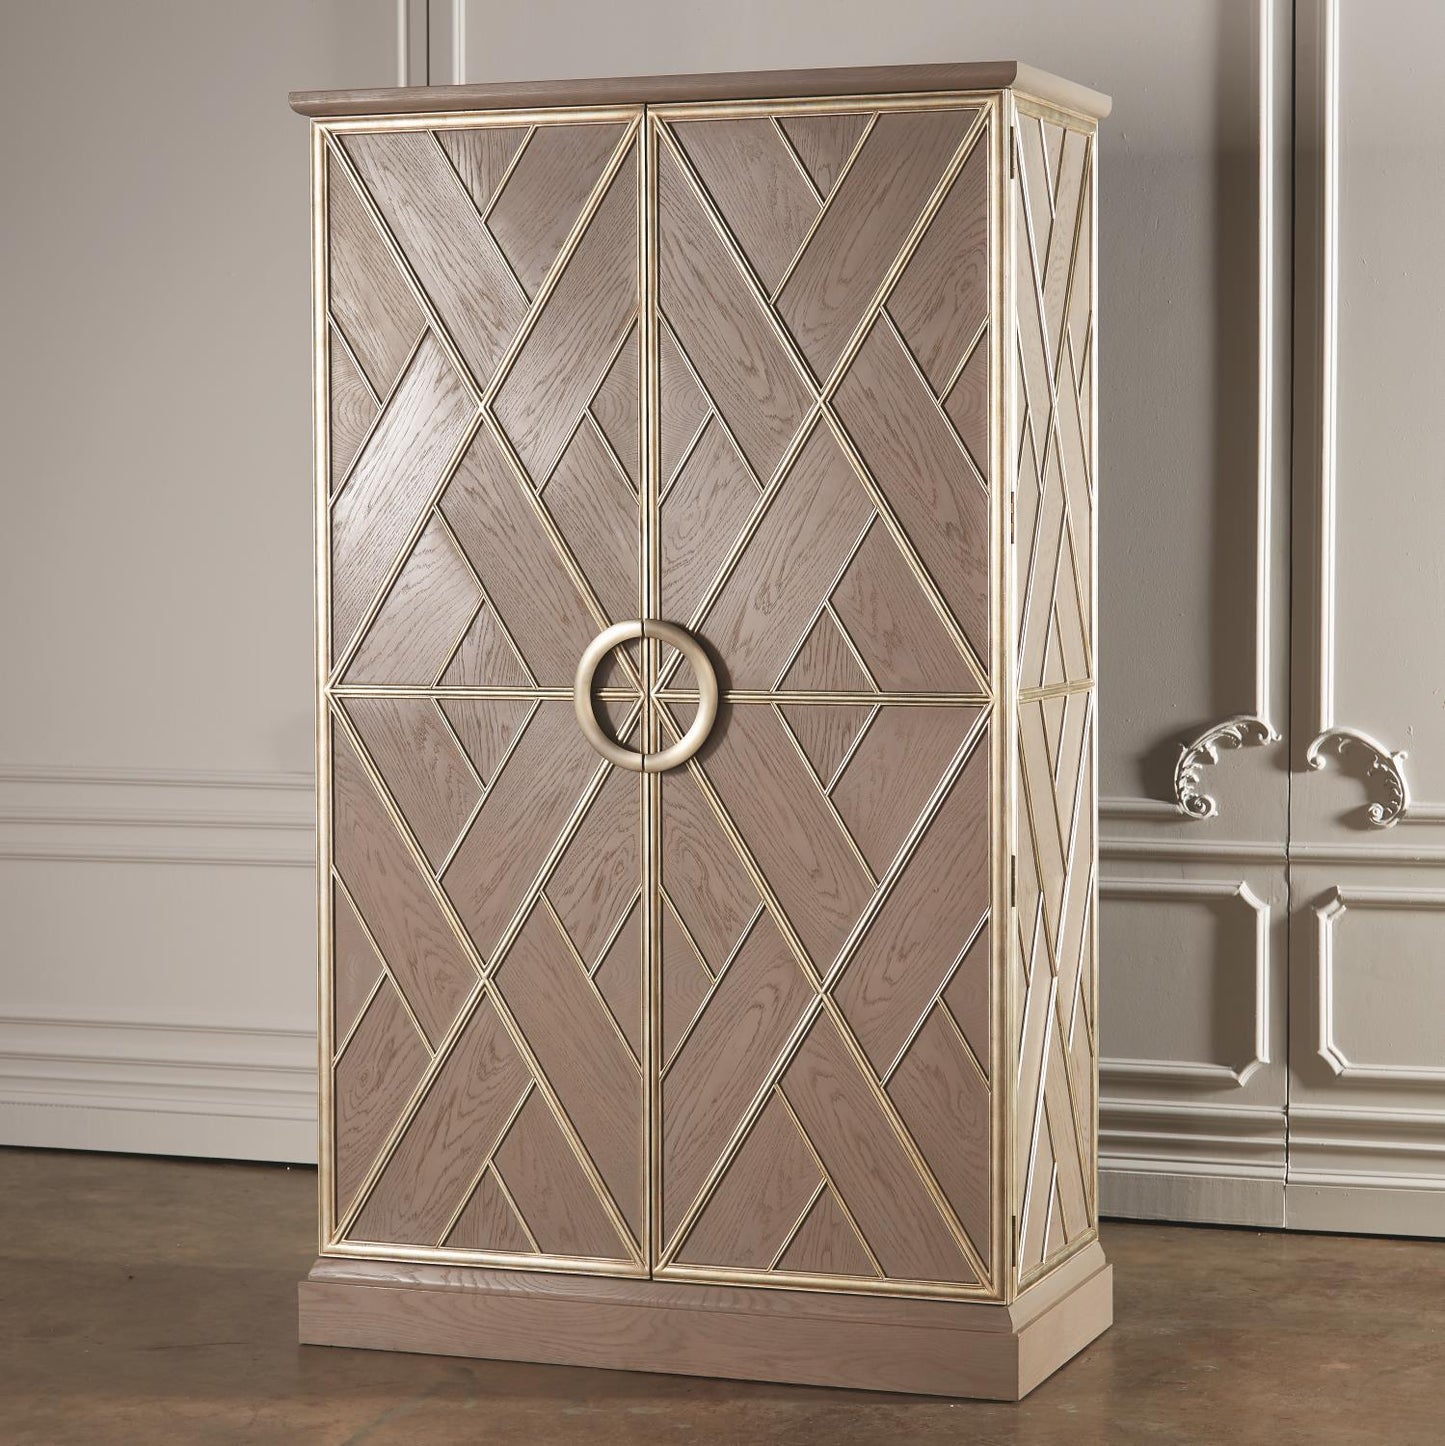 Amherst Collection Tall Cabinet - Grats Decor Interior Design & Build Inc.